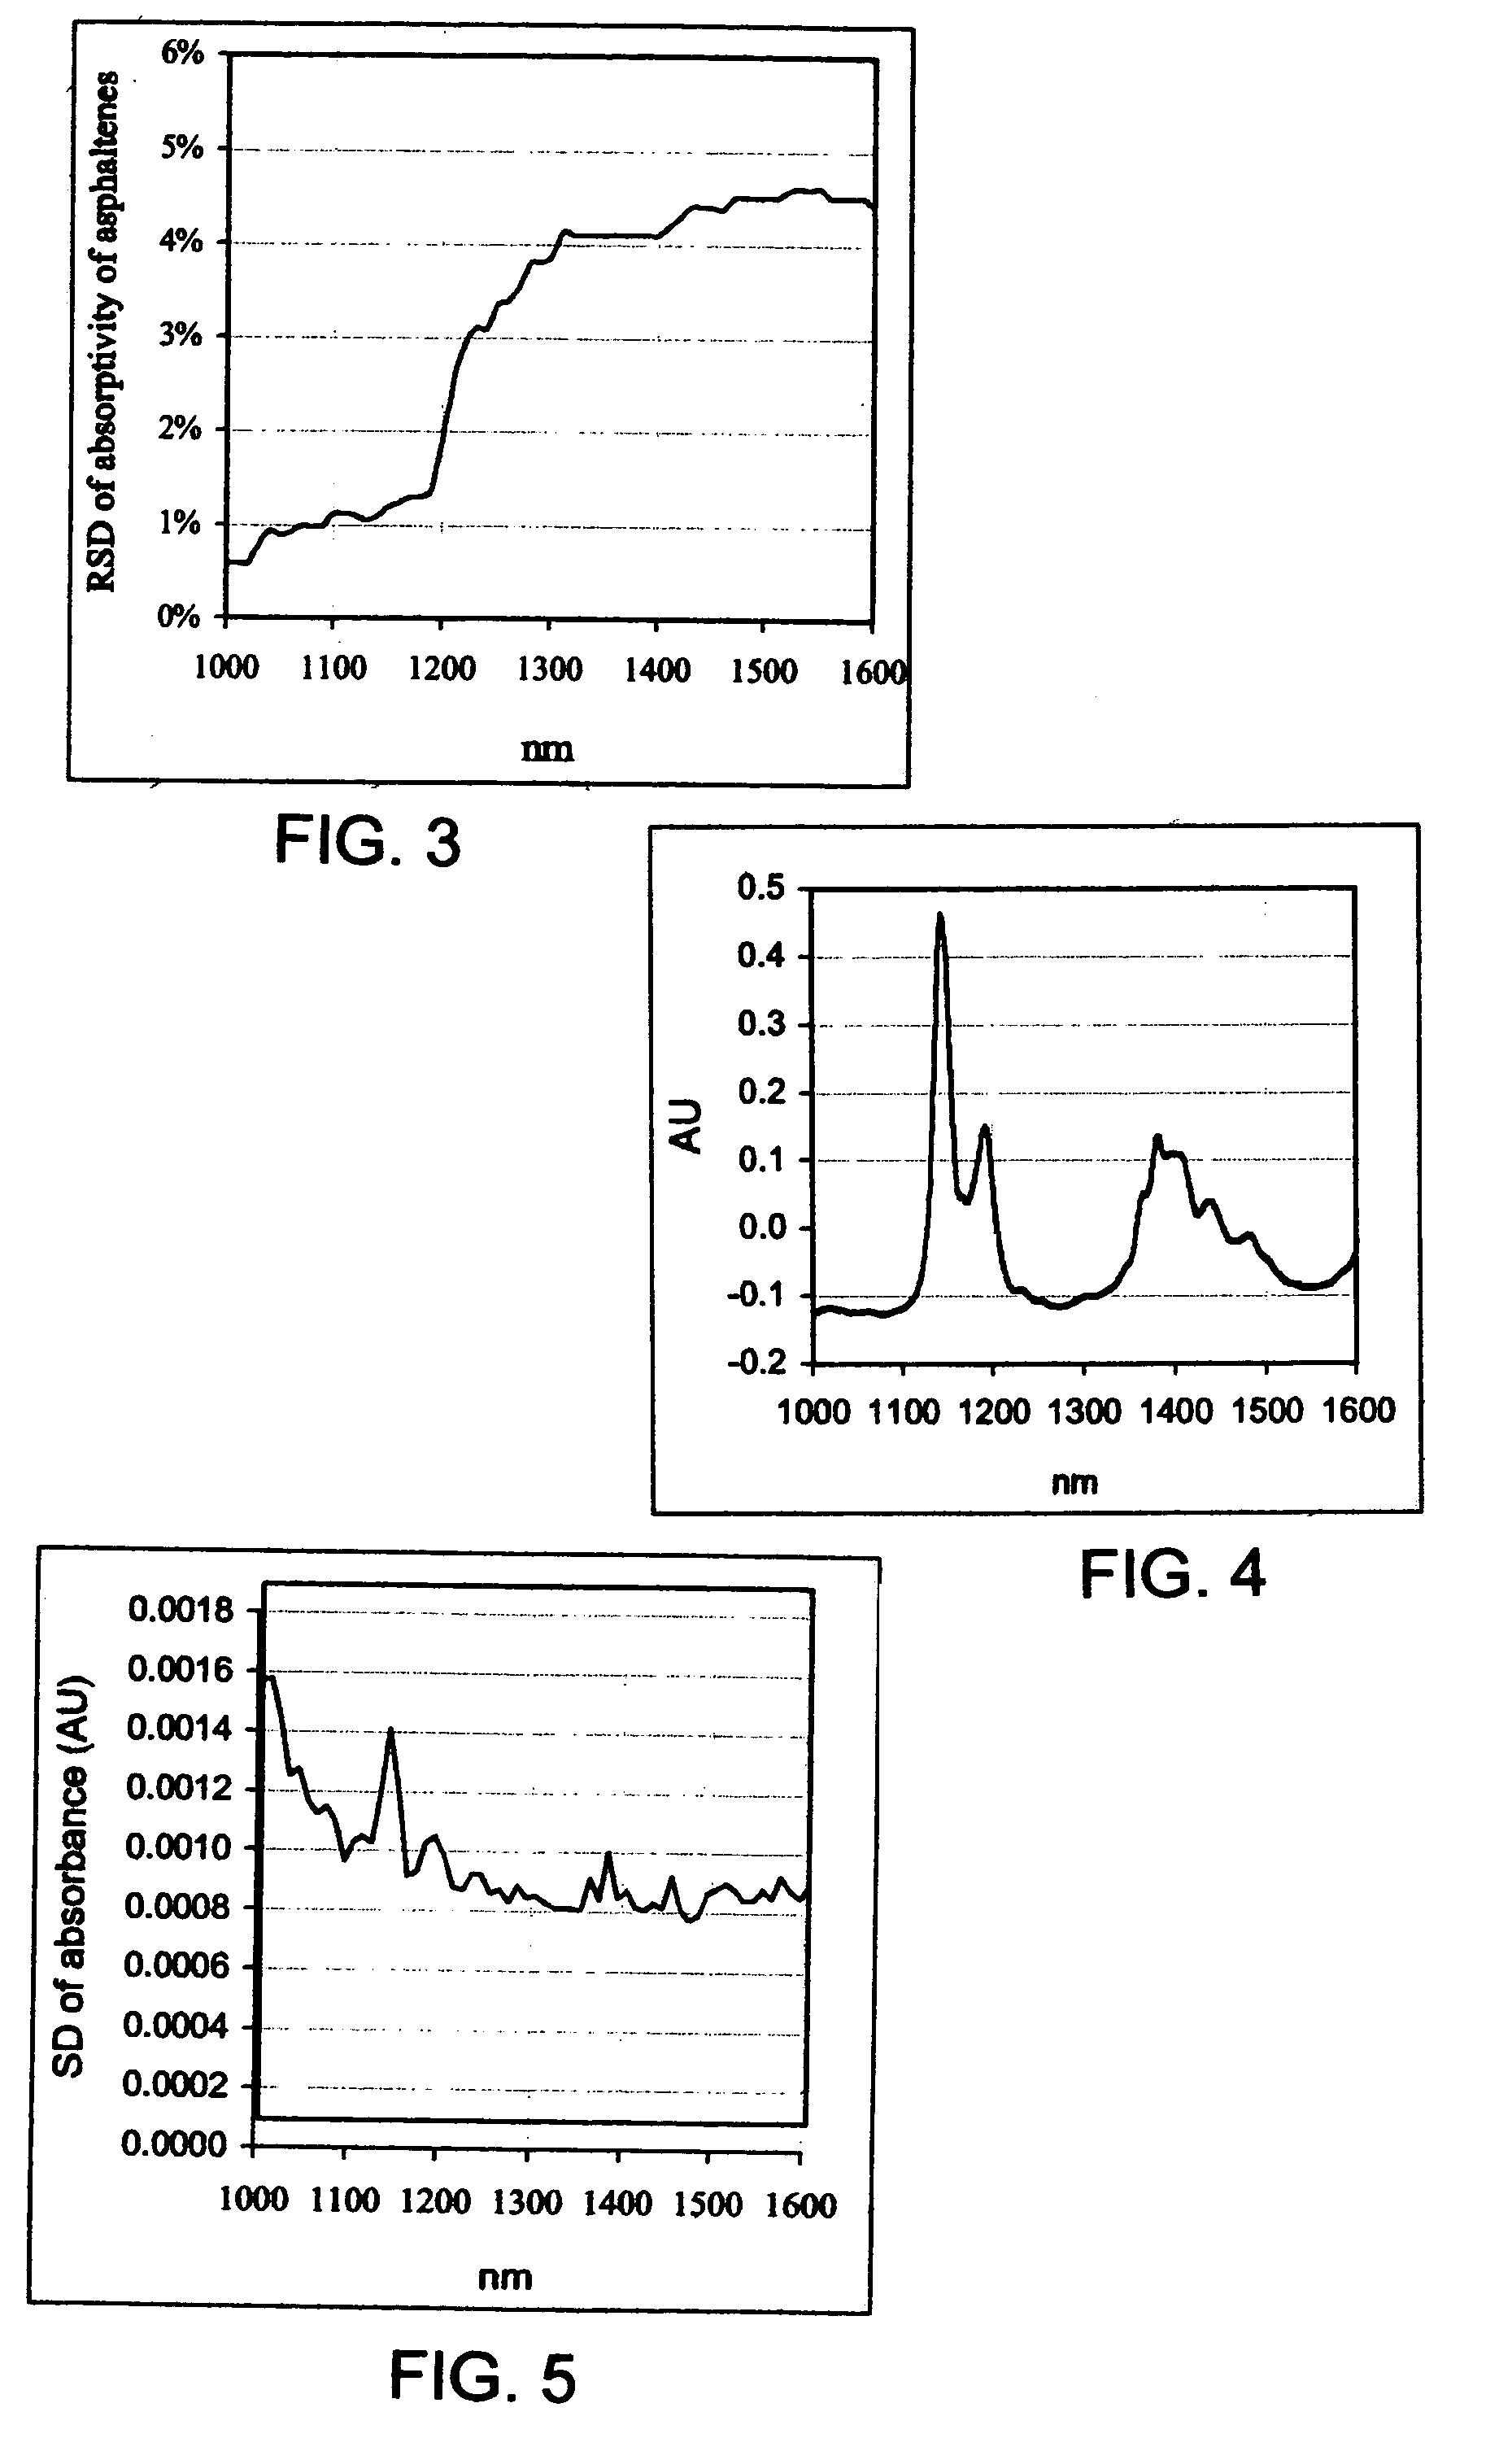 NIR spectroscopy method for analyzing chemical process components